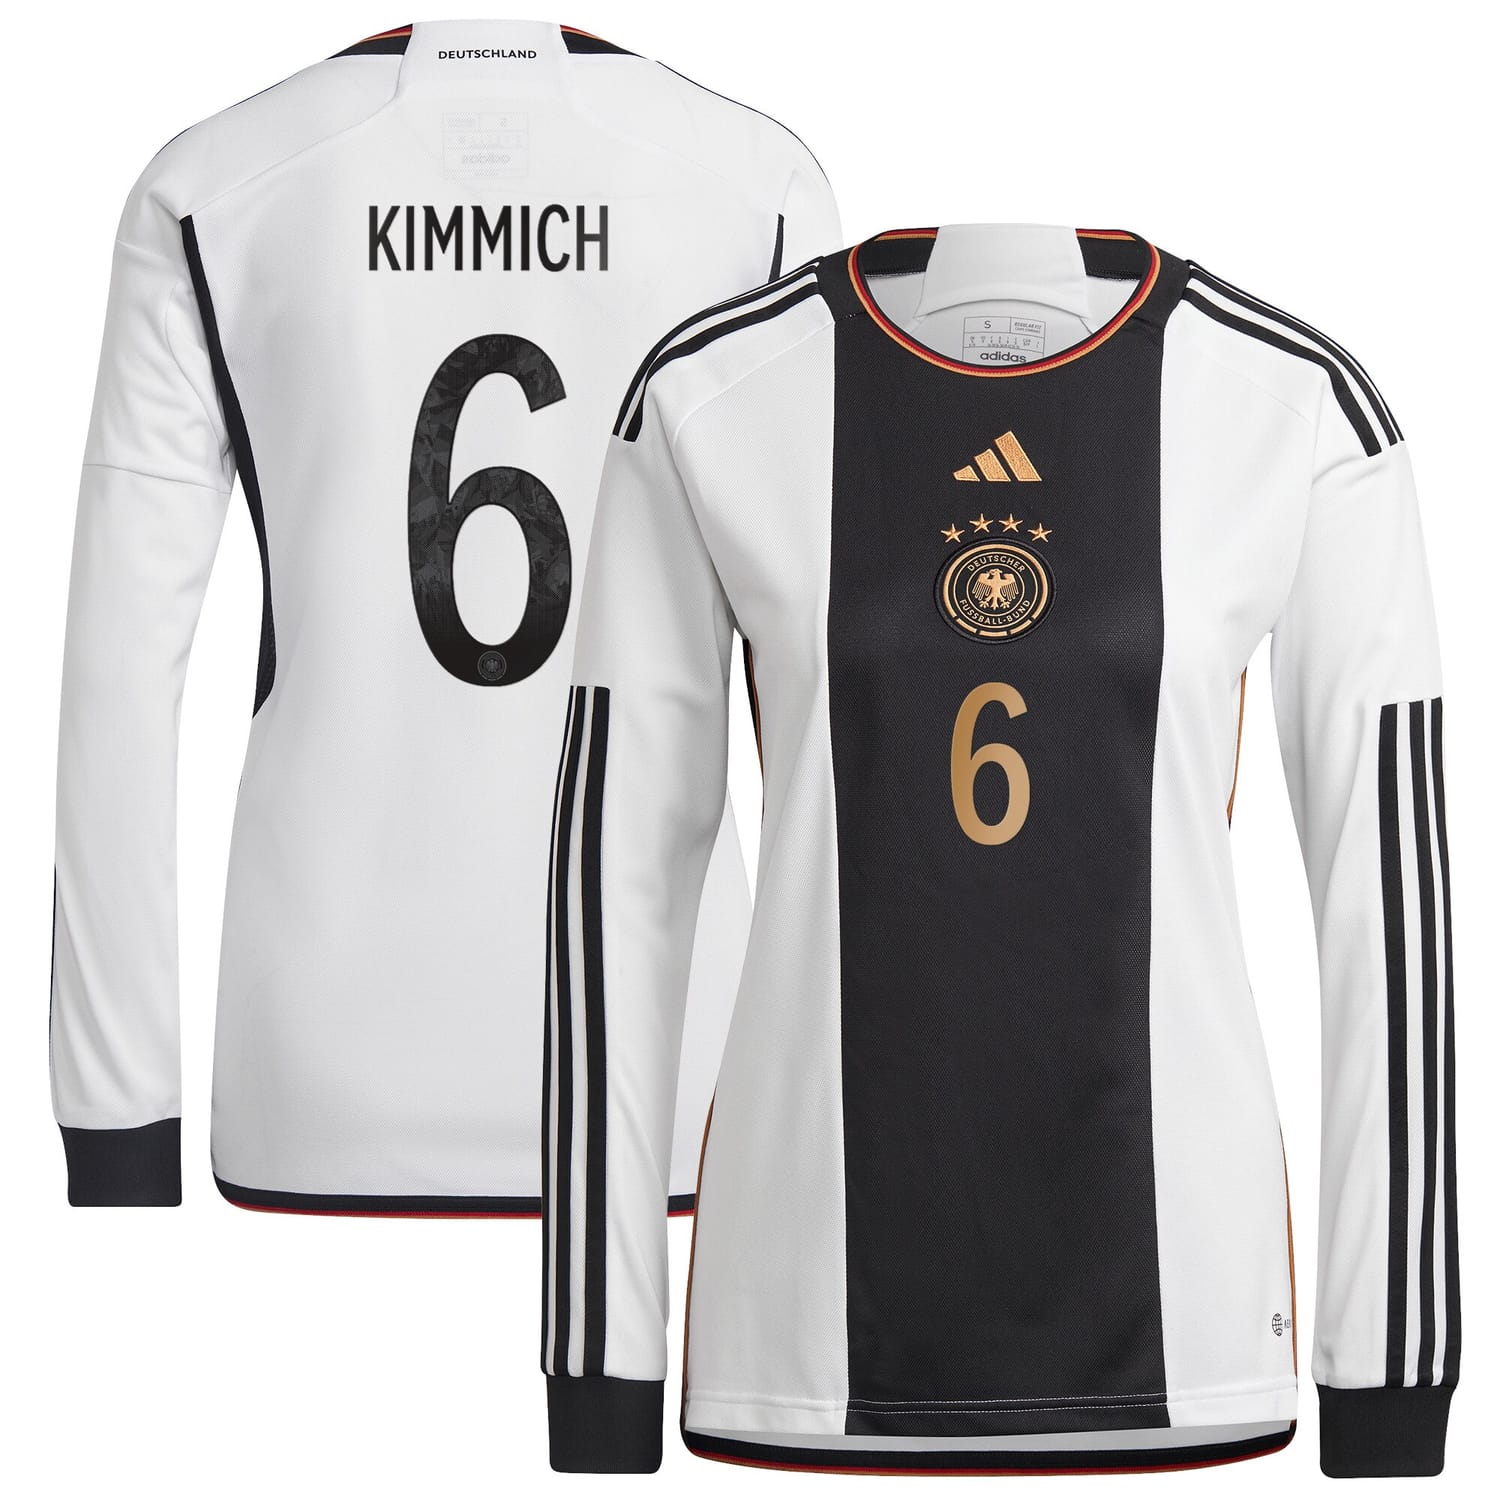 Germany National Team Home Jersey Shirt Long Sleeve player Joshua Kimmich 6 printing for Women